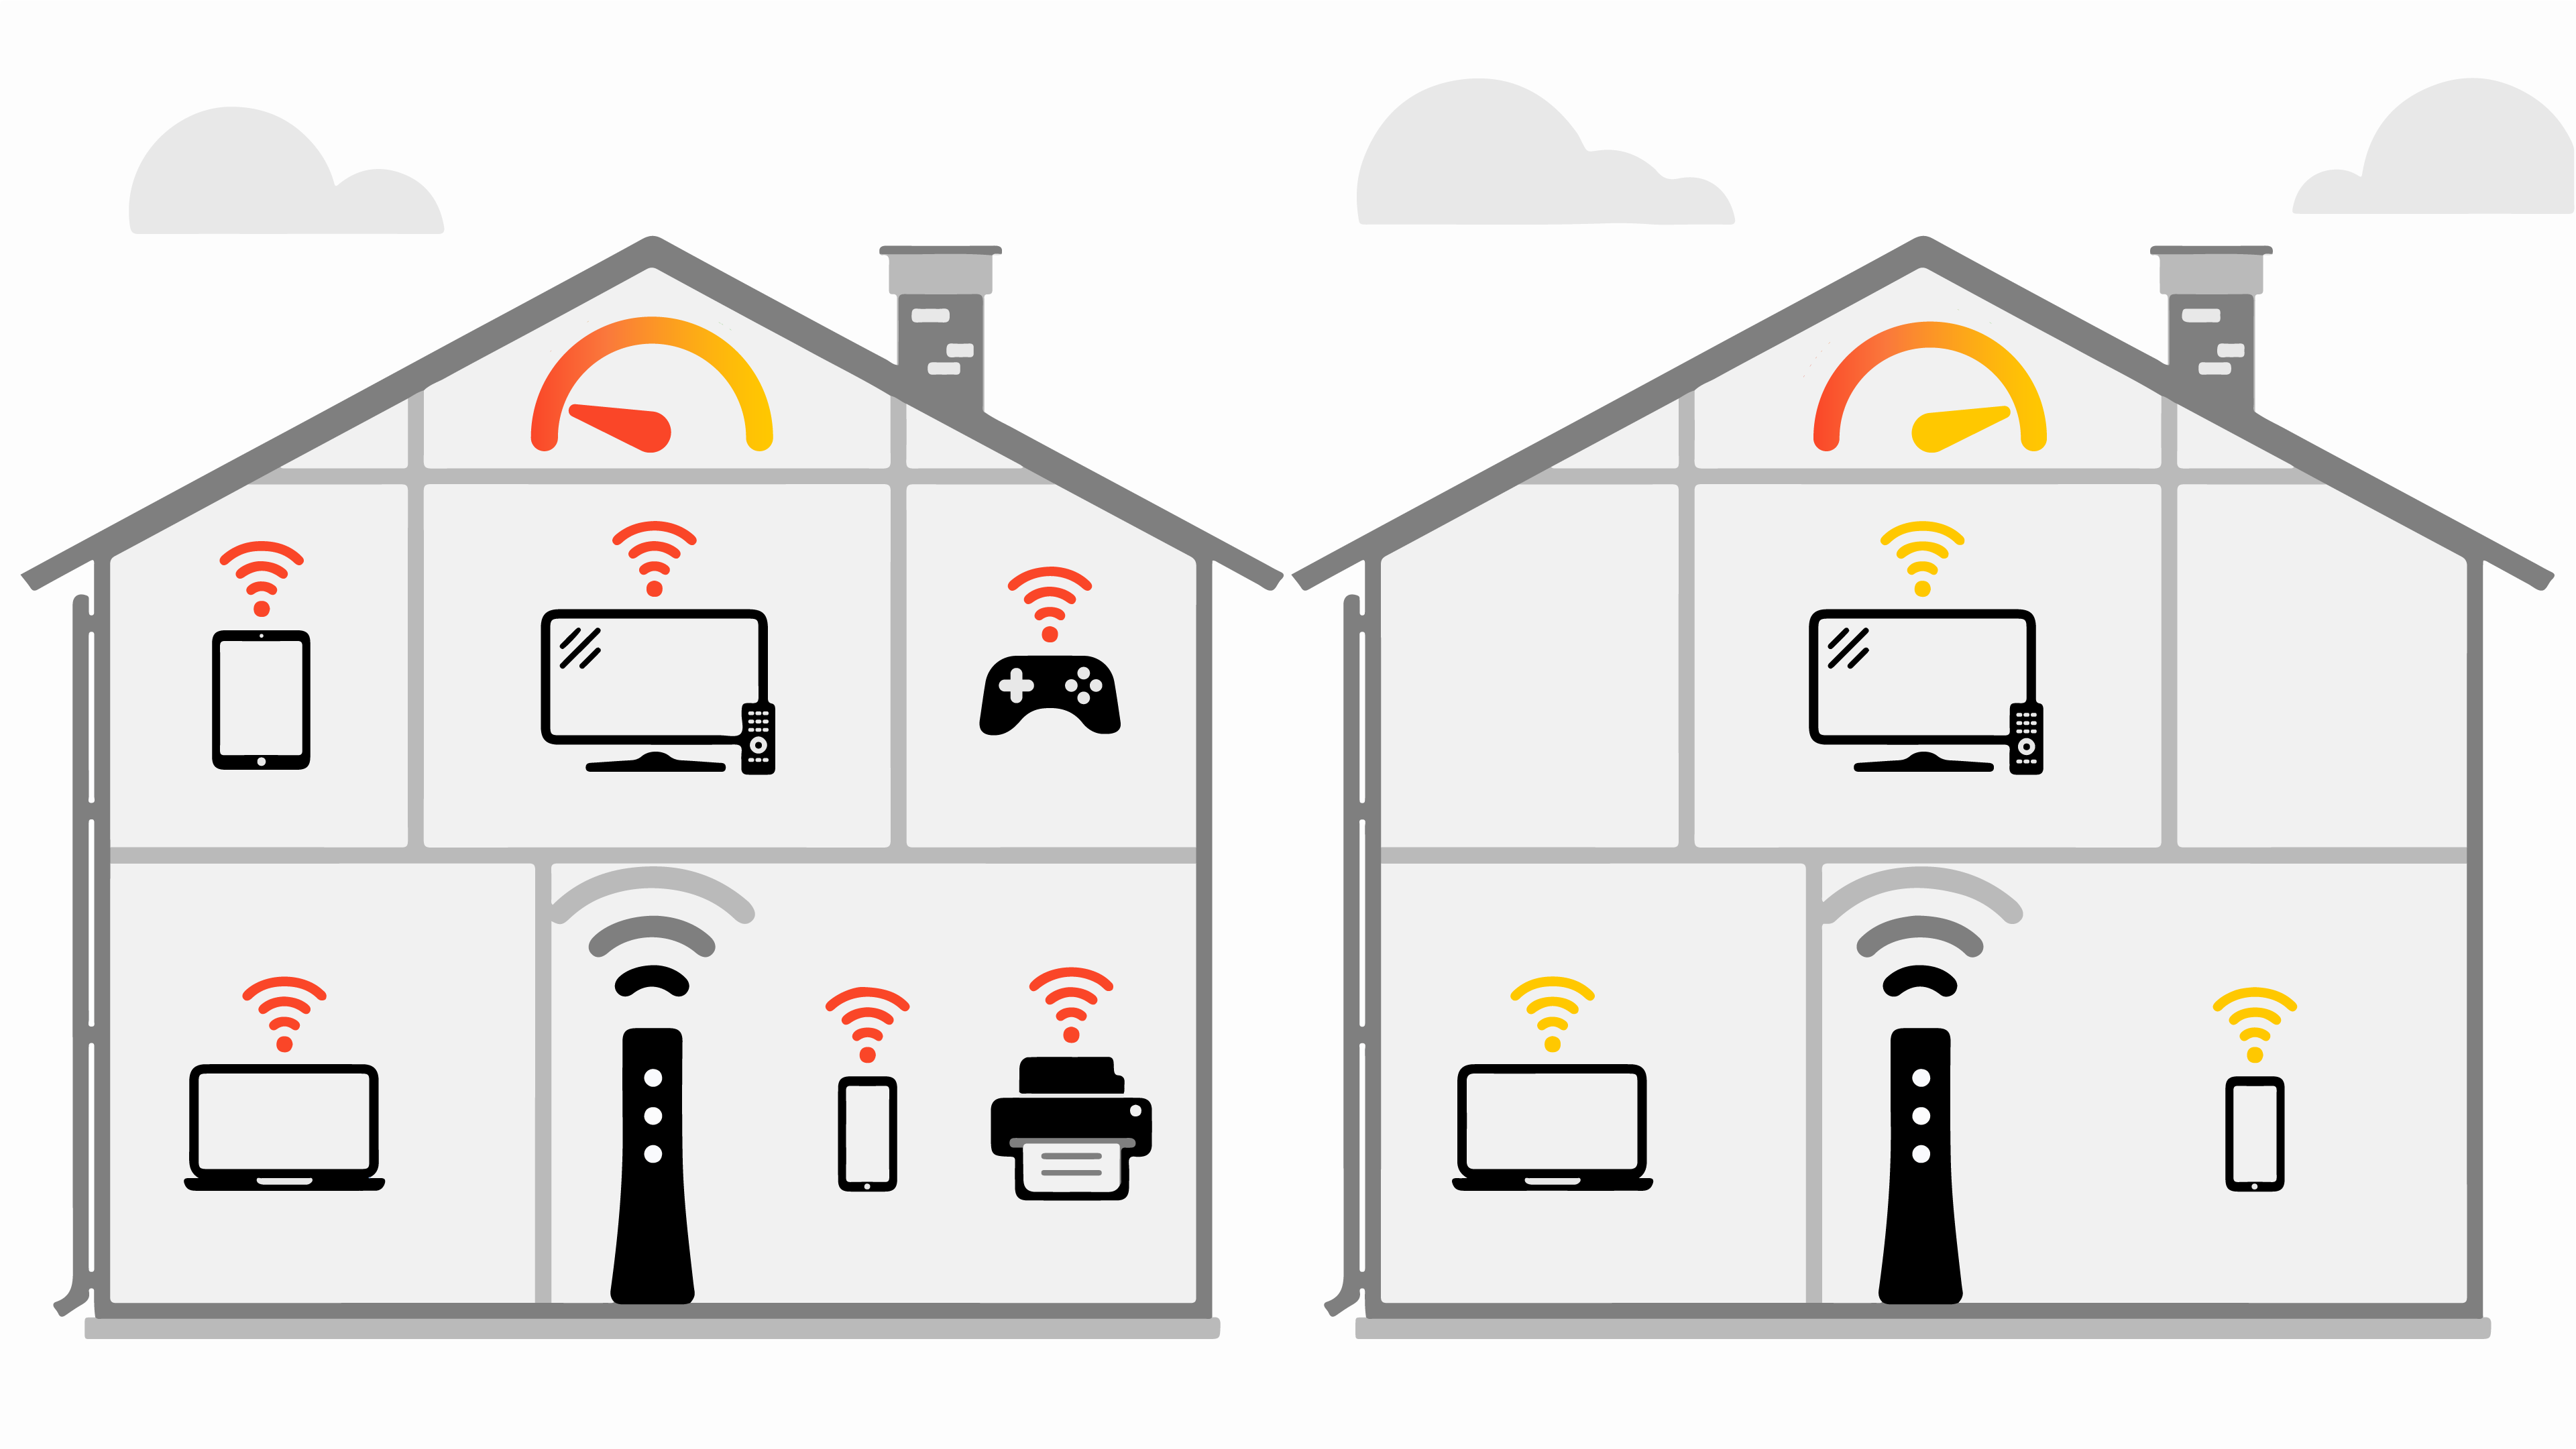 Wifi signal strength and connection speed decrease when more devices are connected